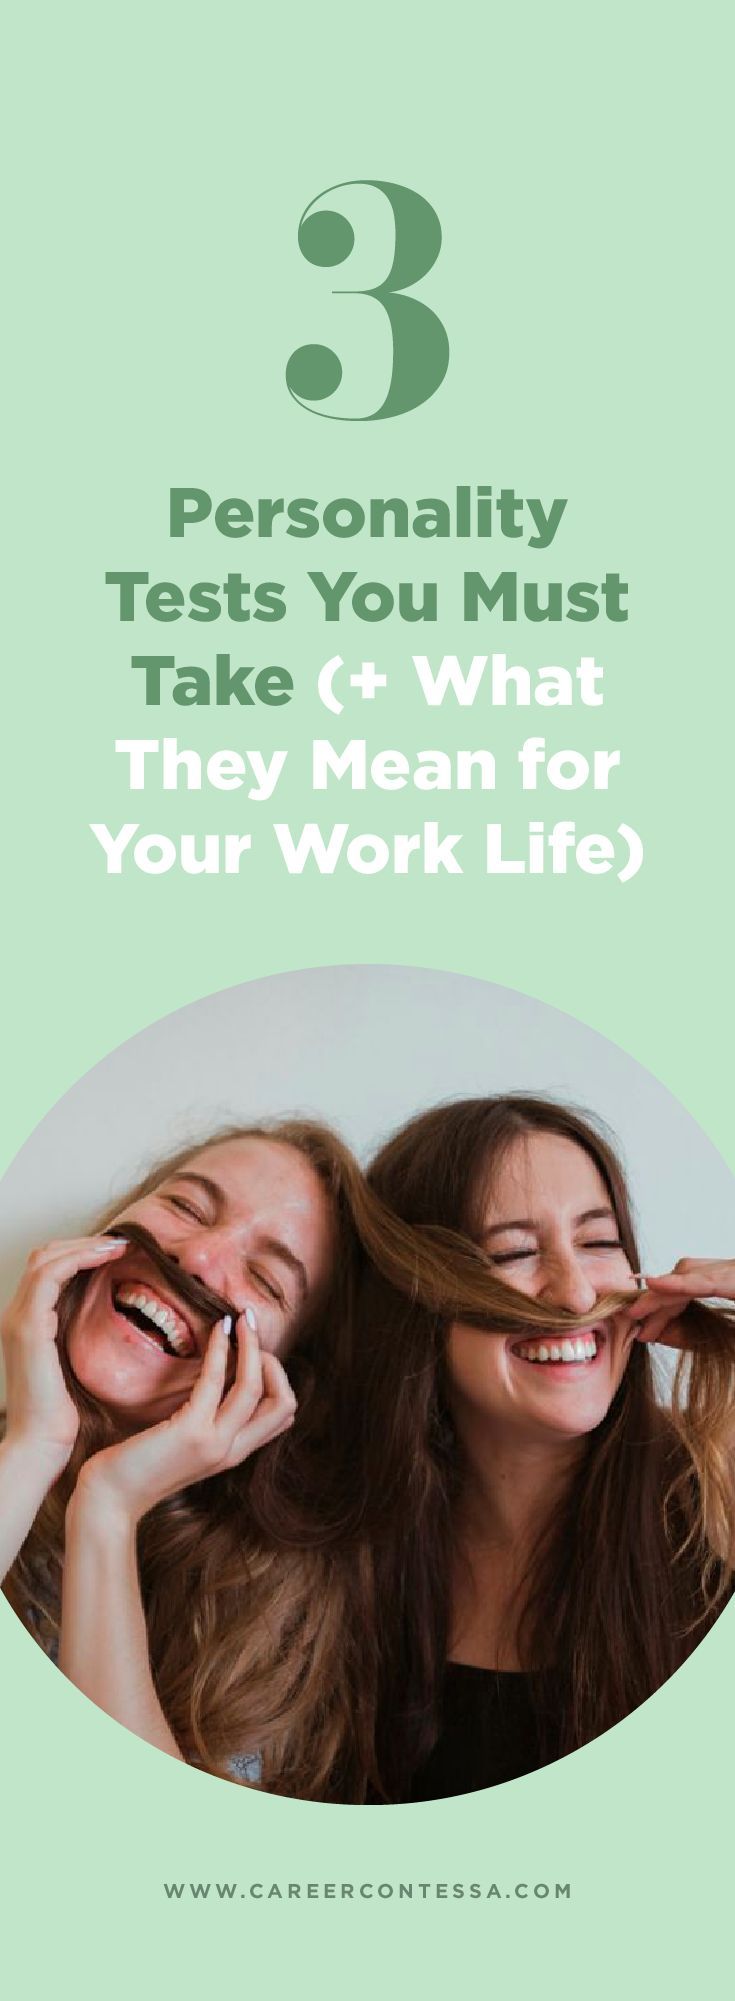 Infographic-3-Personality-Tests-You-Must-Take-What Infographic : 3 Personality Tests You Must Take (+ What They Mean for Your Work Life)